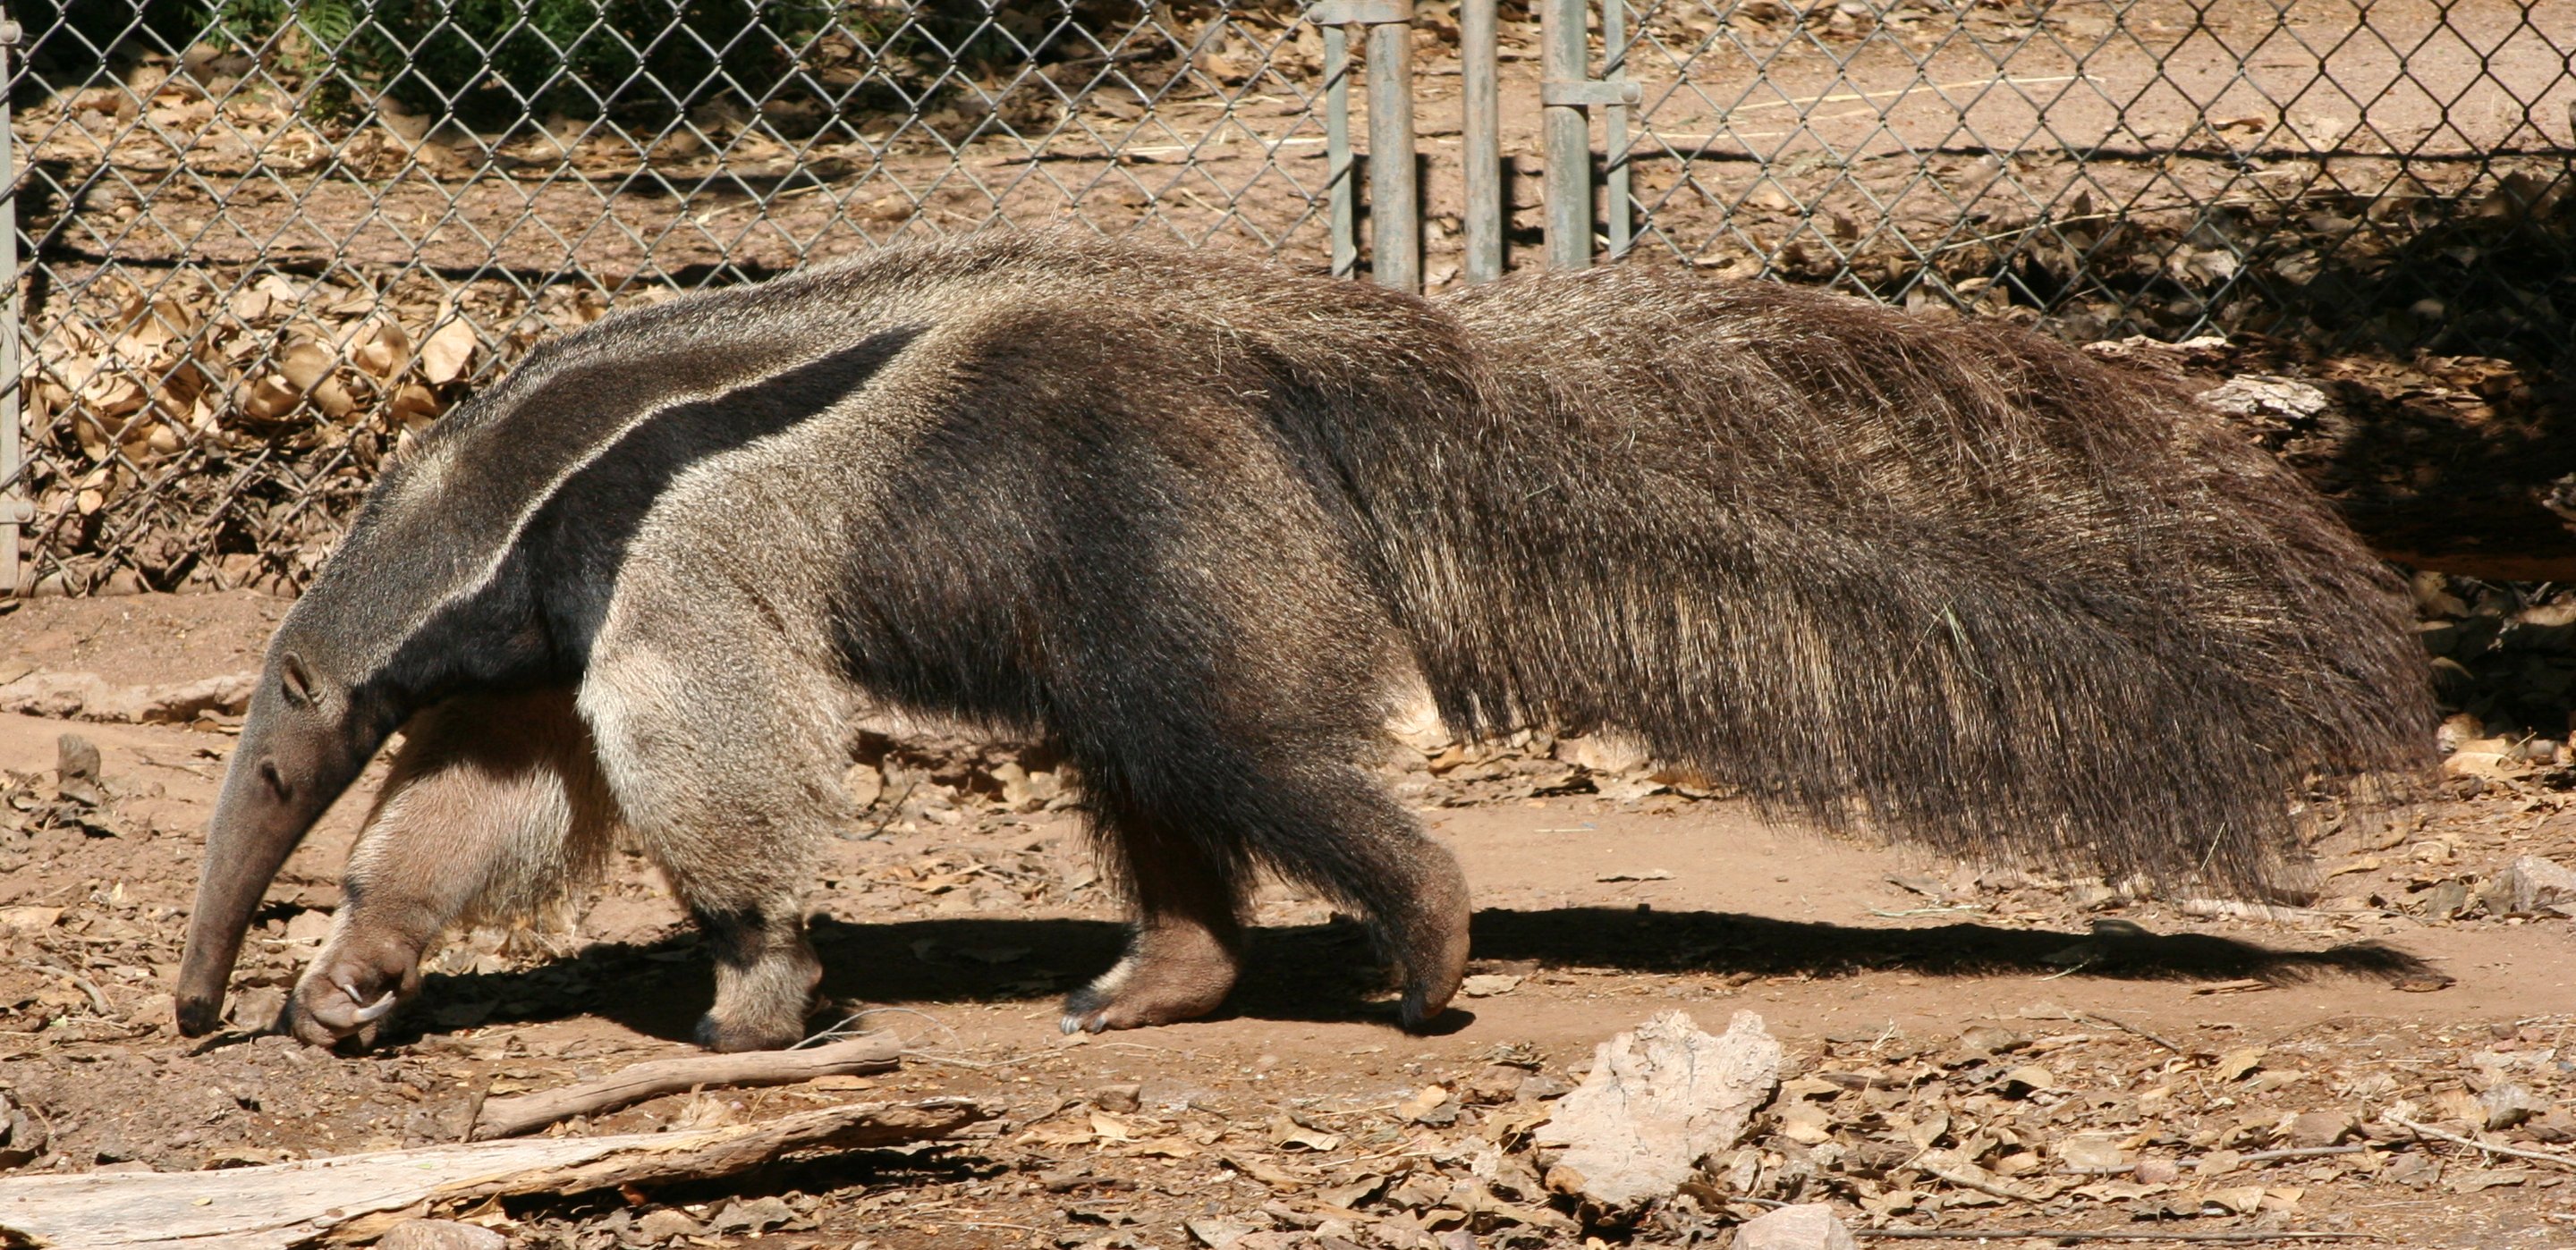 The anteater's tail can mask it very well during sleep